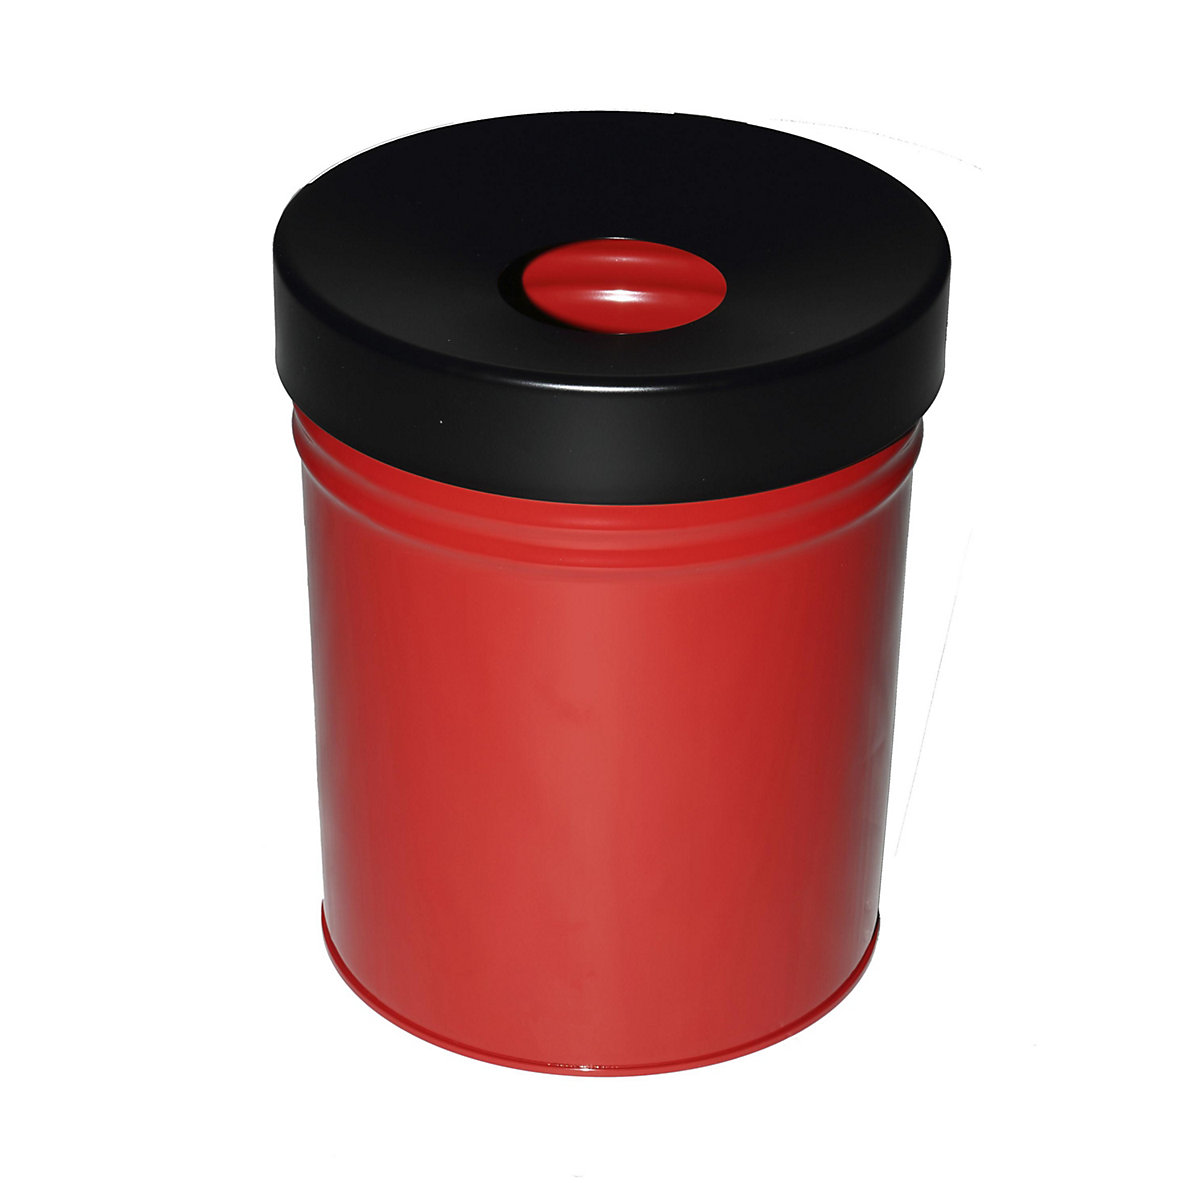 Waste collector, self extinguishing, capacity 30 l, HxØ 415 x 344 mm, red